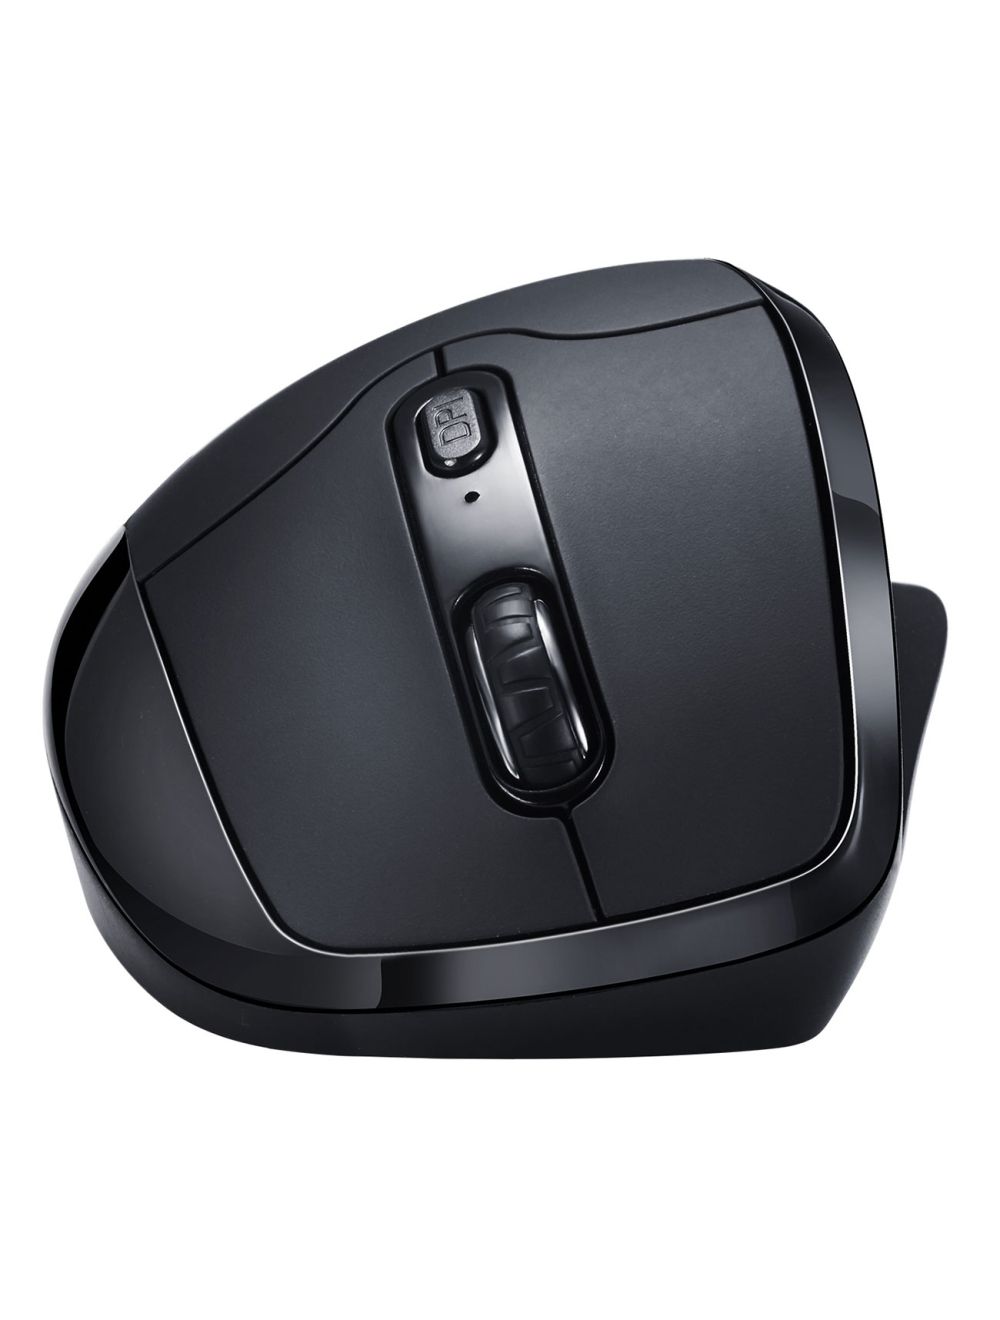 Newtral 3 Mouse Medium Right